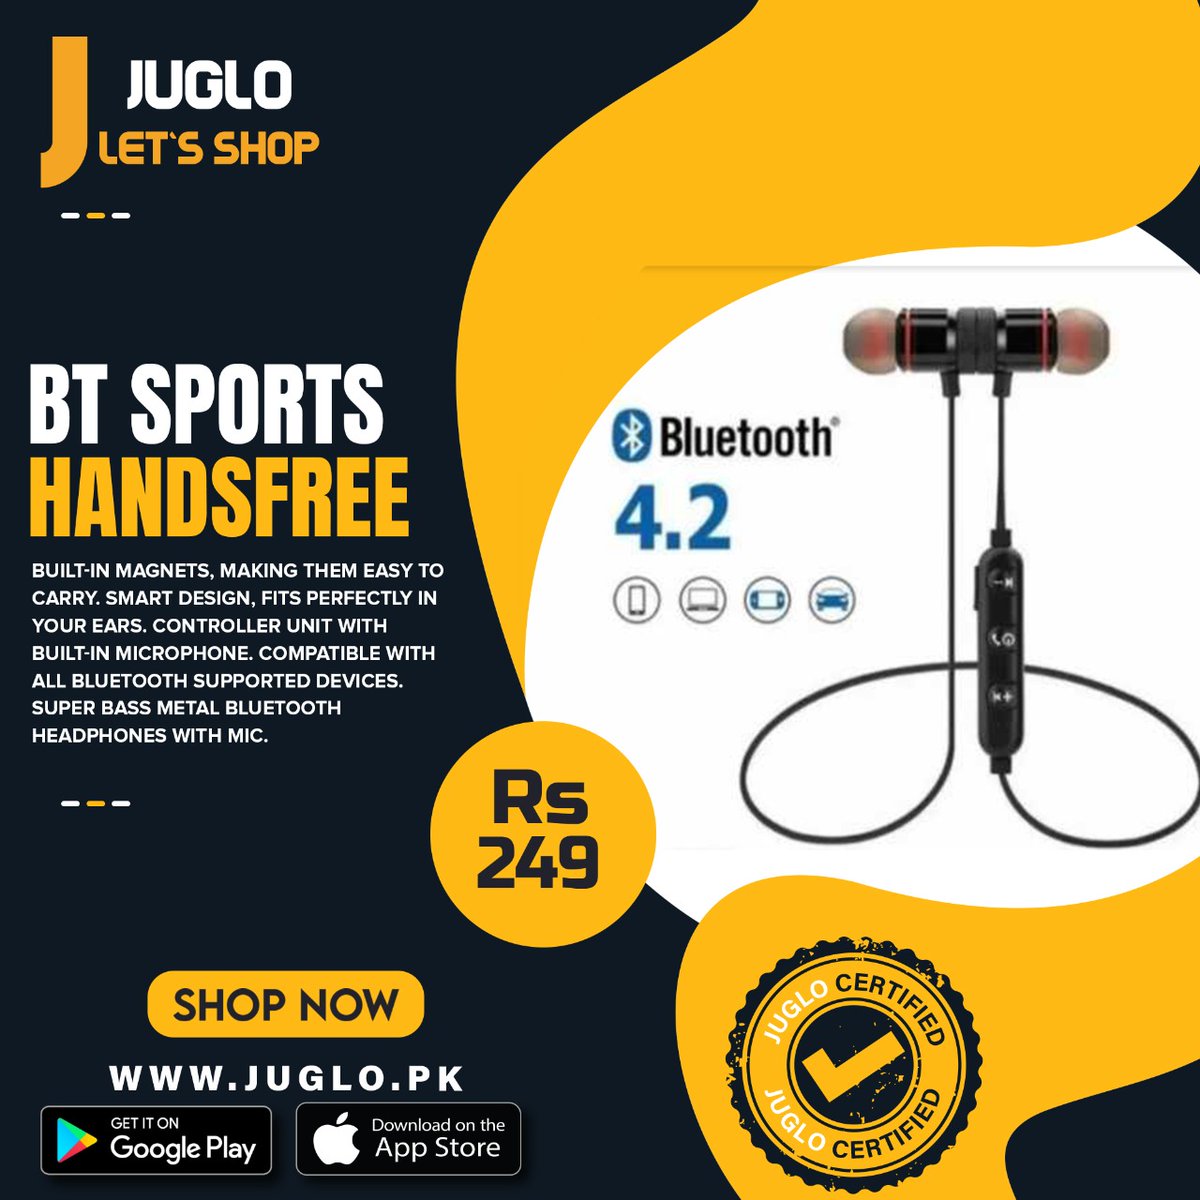 Get The Right Gadget For Your Music And Keep Your Ears Safe But Music Loud...
juglo.pk/sports-bluetoo…
#juglopk #shopping #onlineshopping #handsfree #Bluetooth #sports #music #musicaccessories #headphones